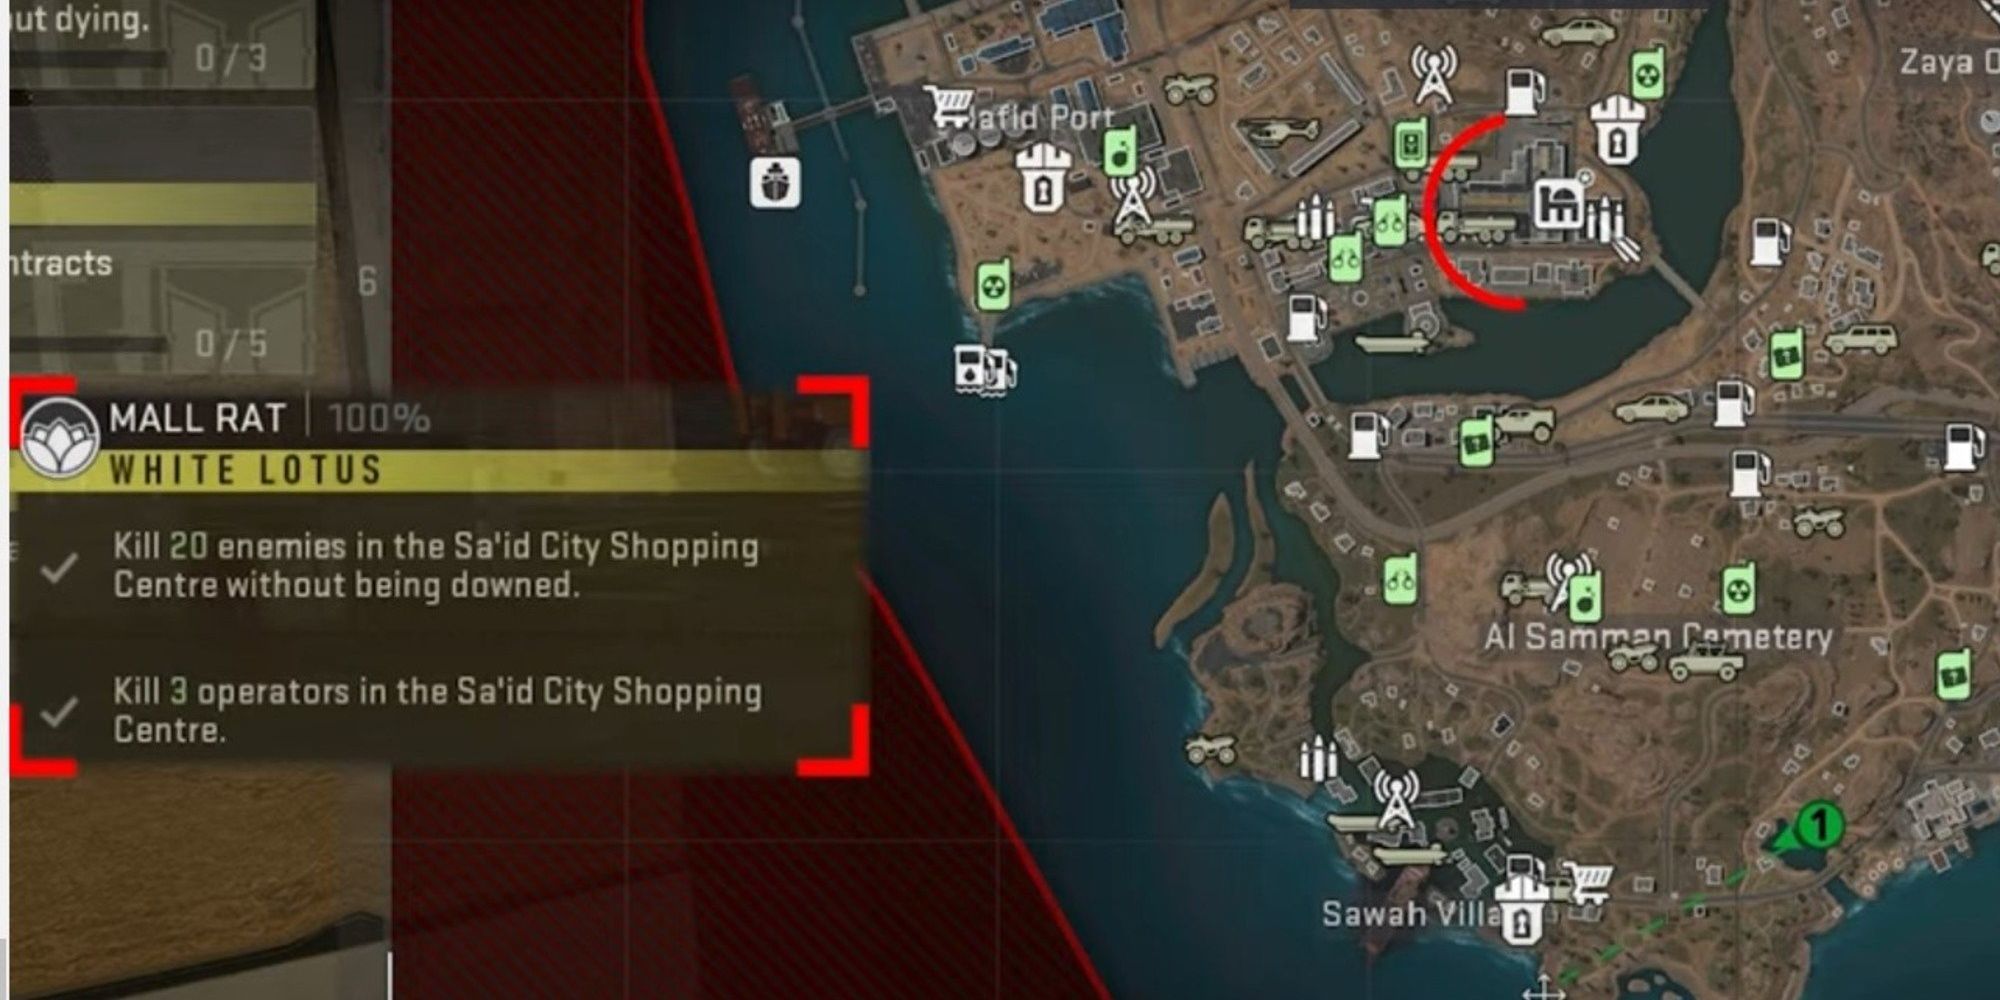 The Mall Rat mission in Warzone 2 DMZ and the map is shown by the character.